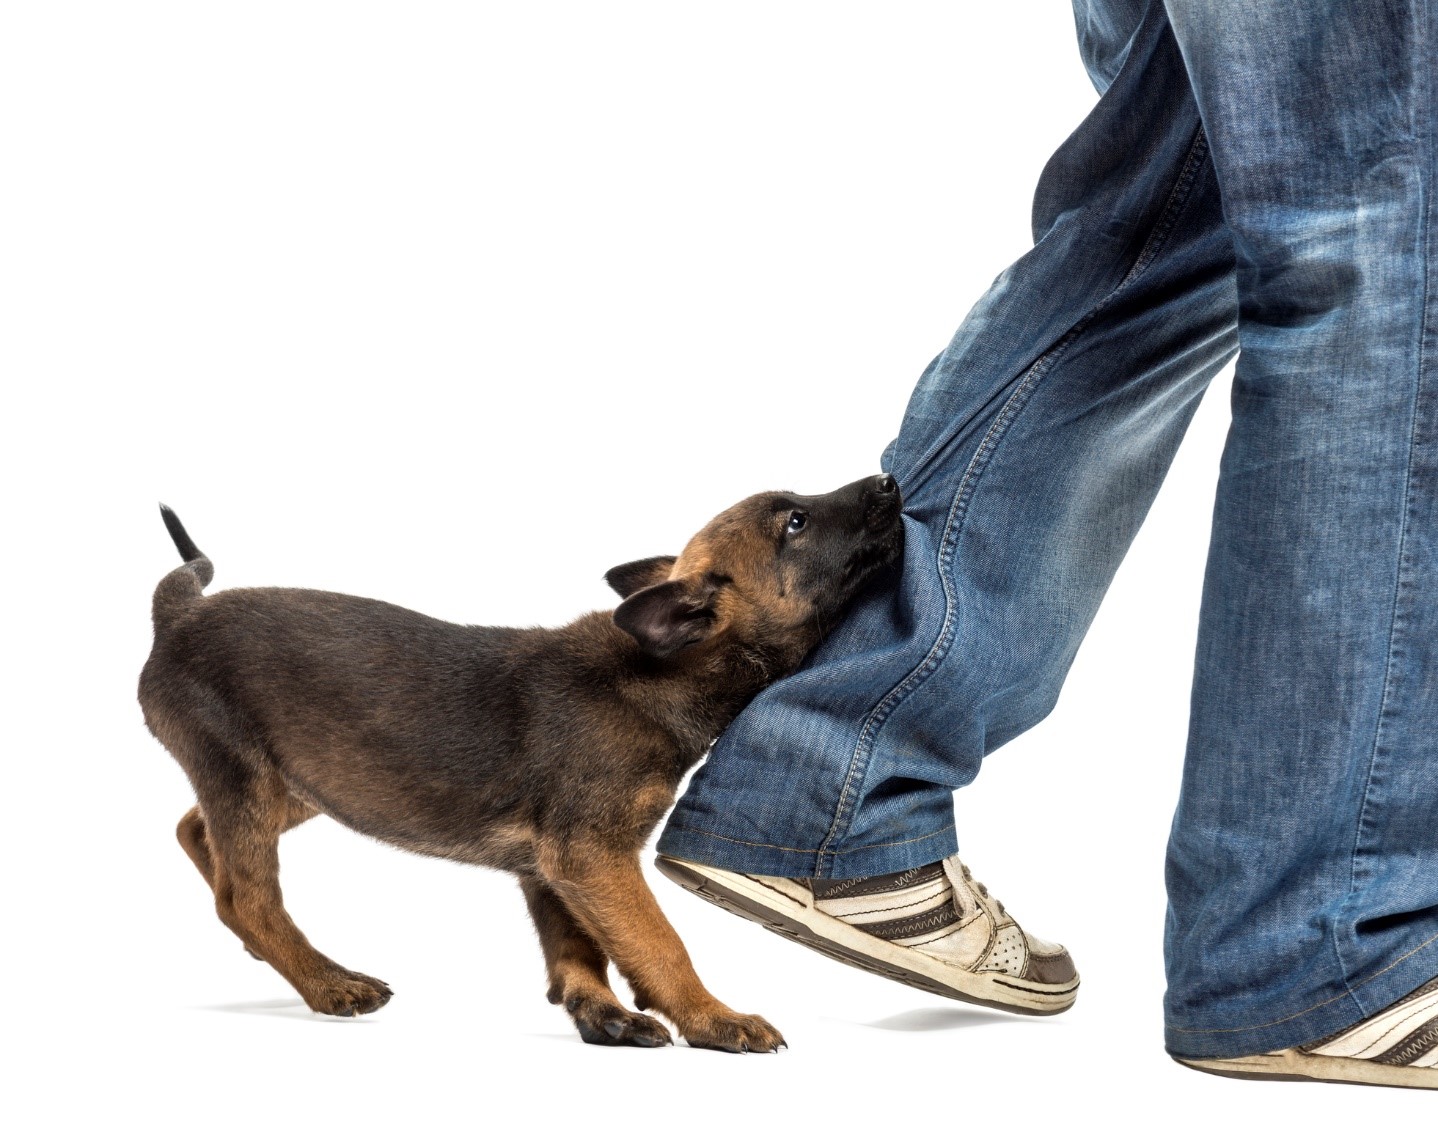 Puppy biting mans jeans on his leg